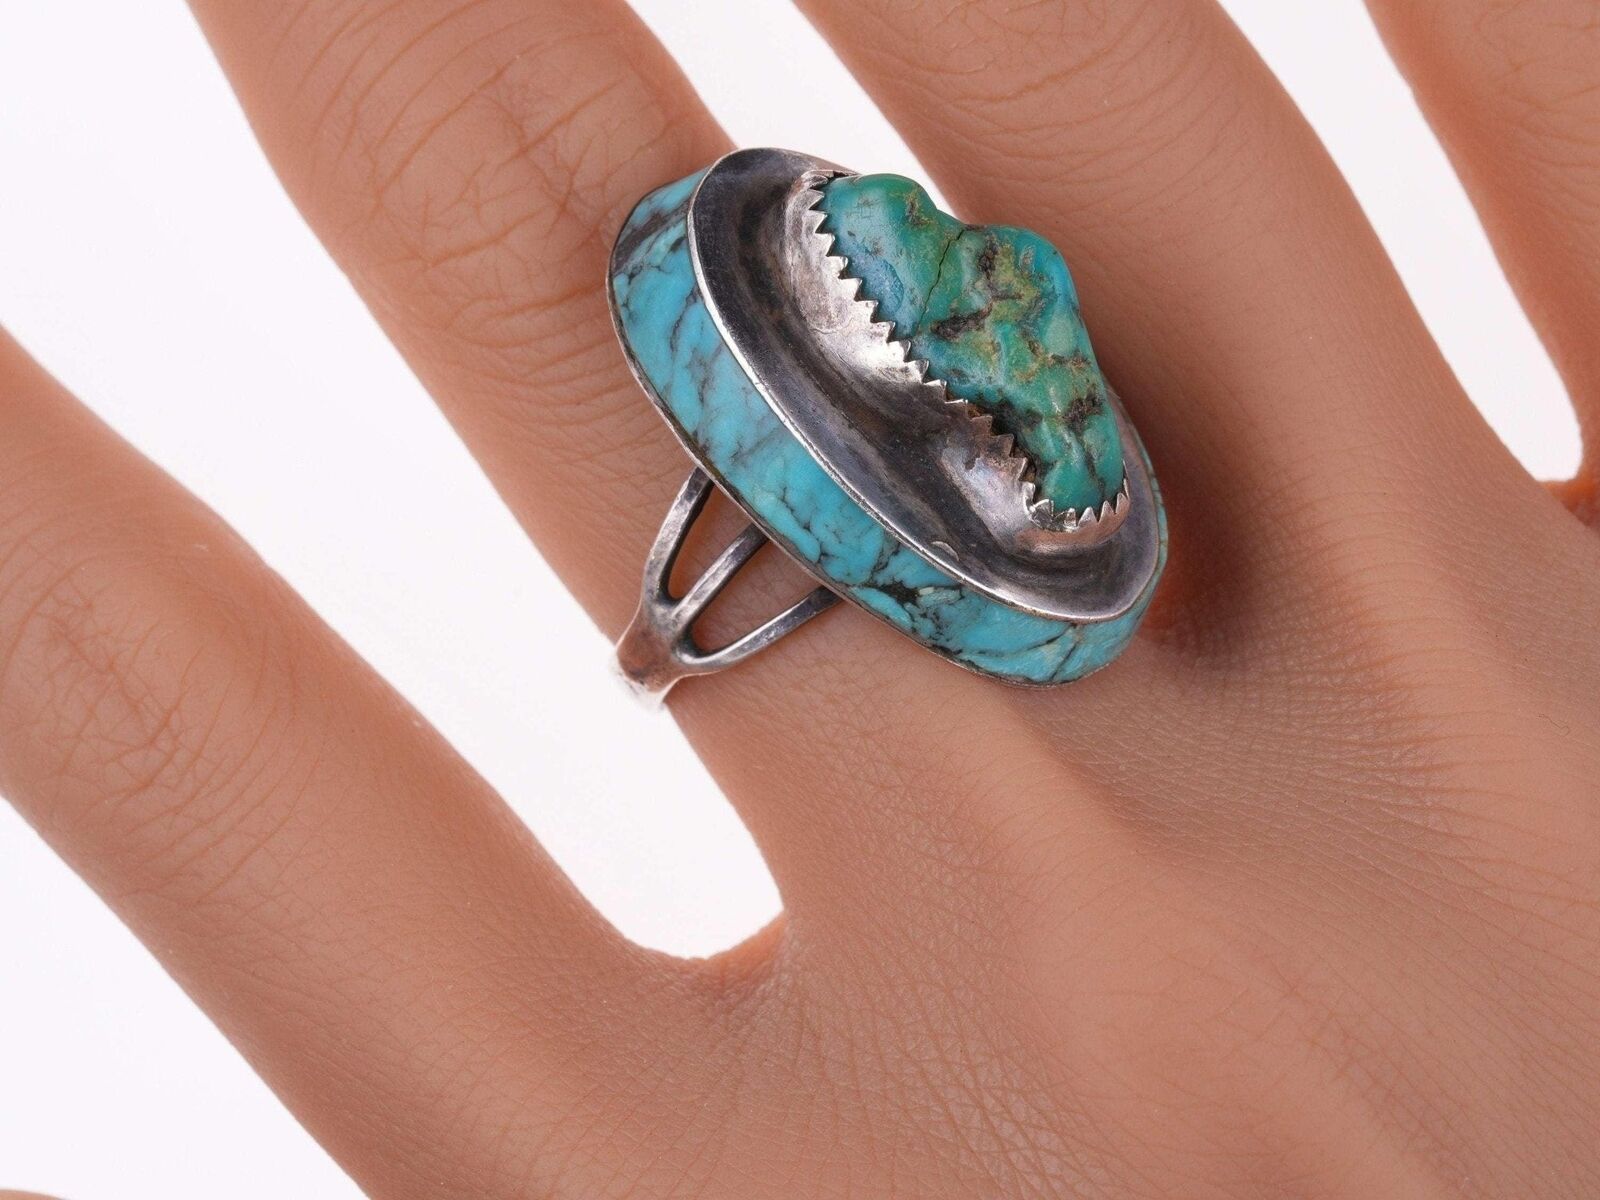 Sz8.5 Vintage Native American sterling and turquoise ring